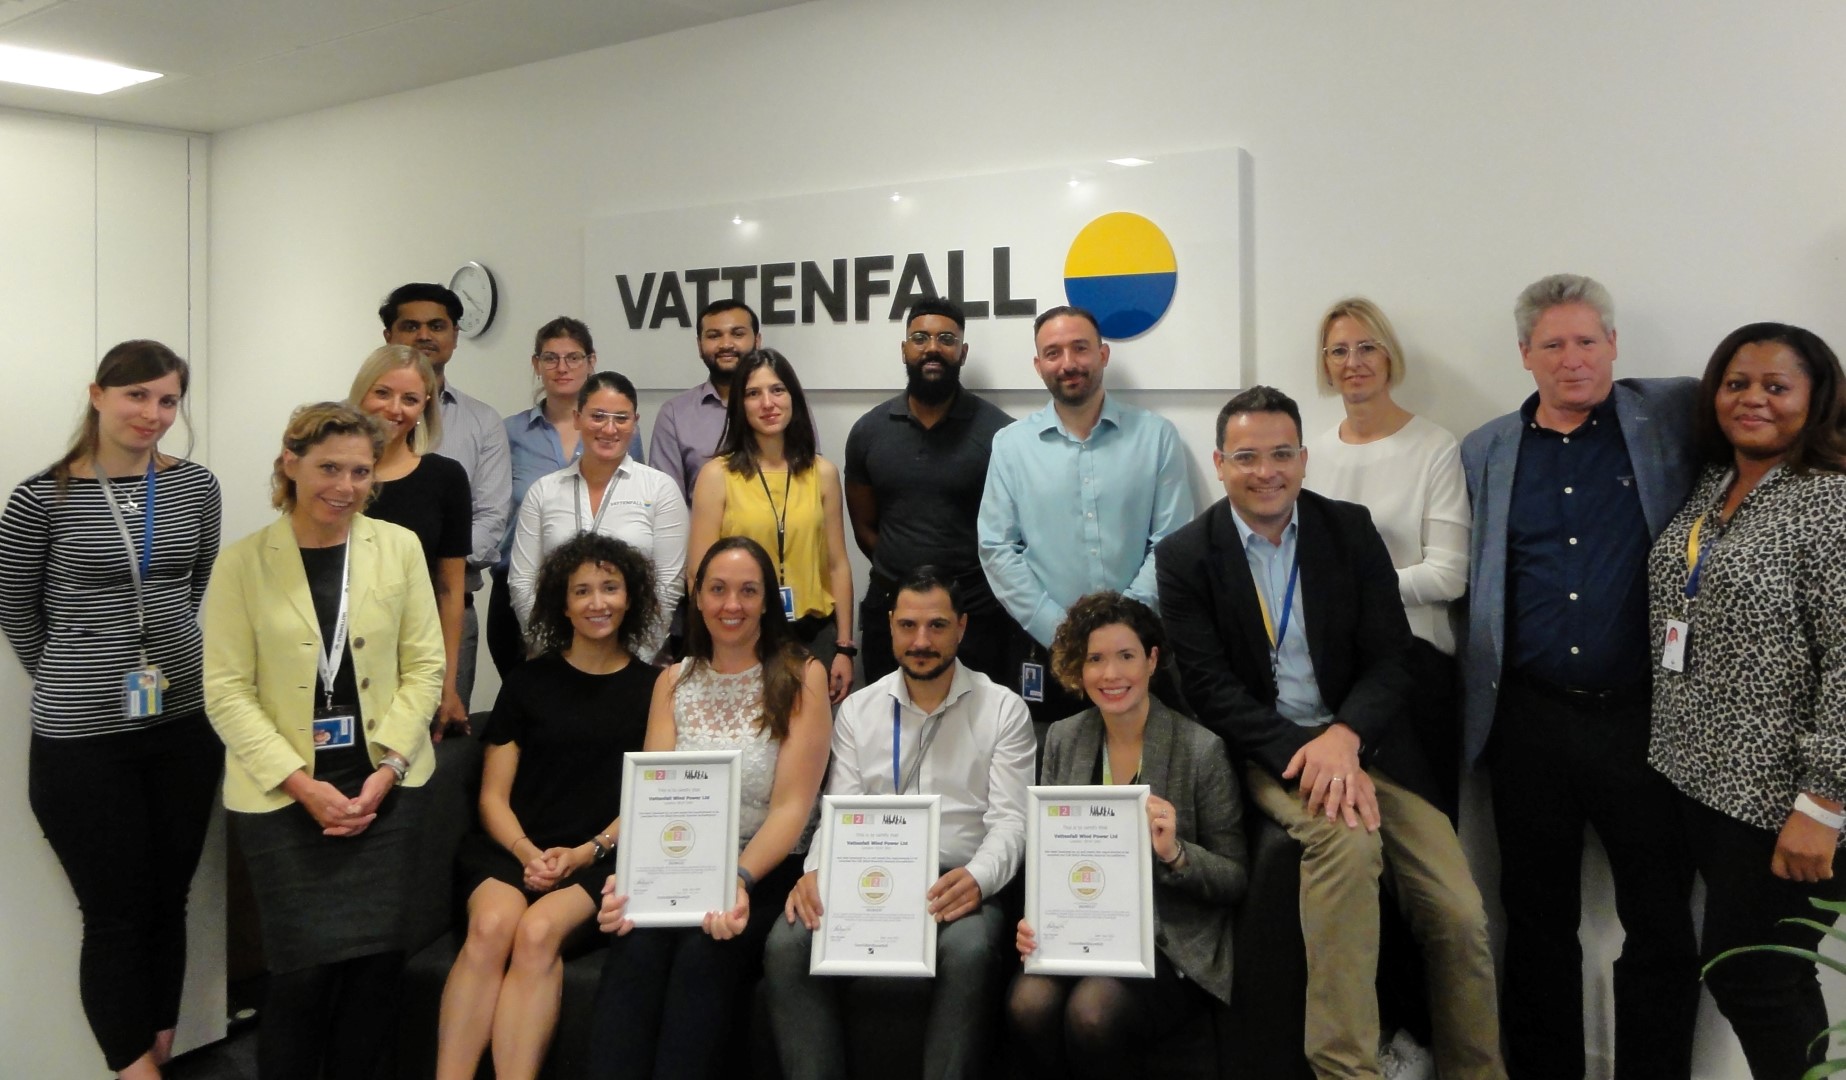 Vattenfall Achieves Gold Standard For Commitment To Diversity And Inclusion  - Vattenfall